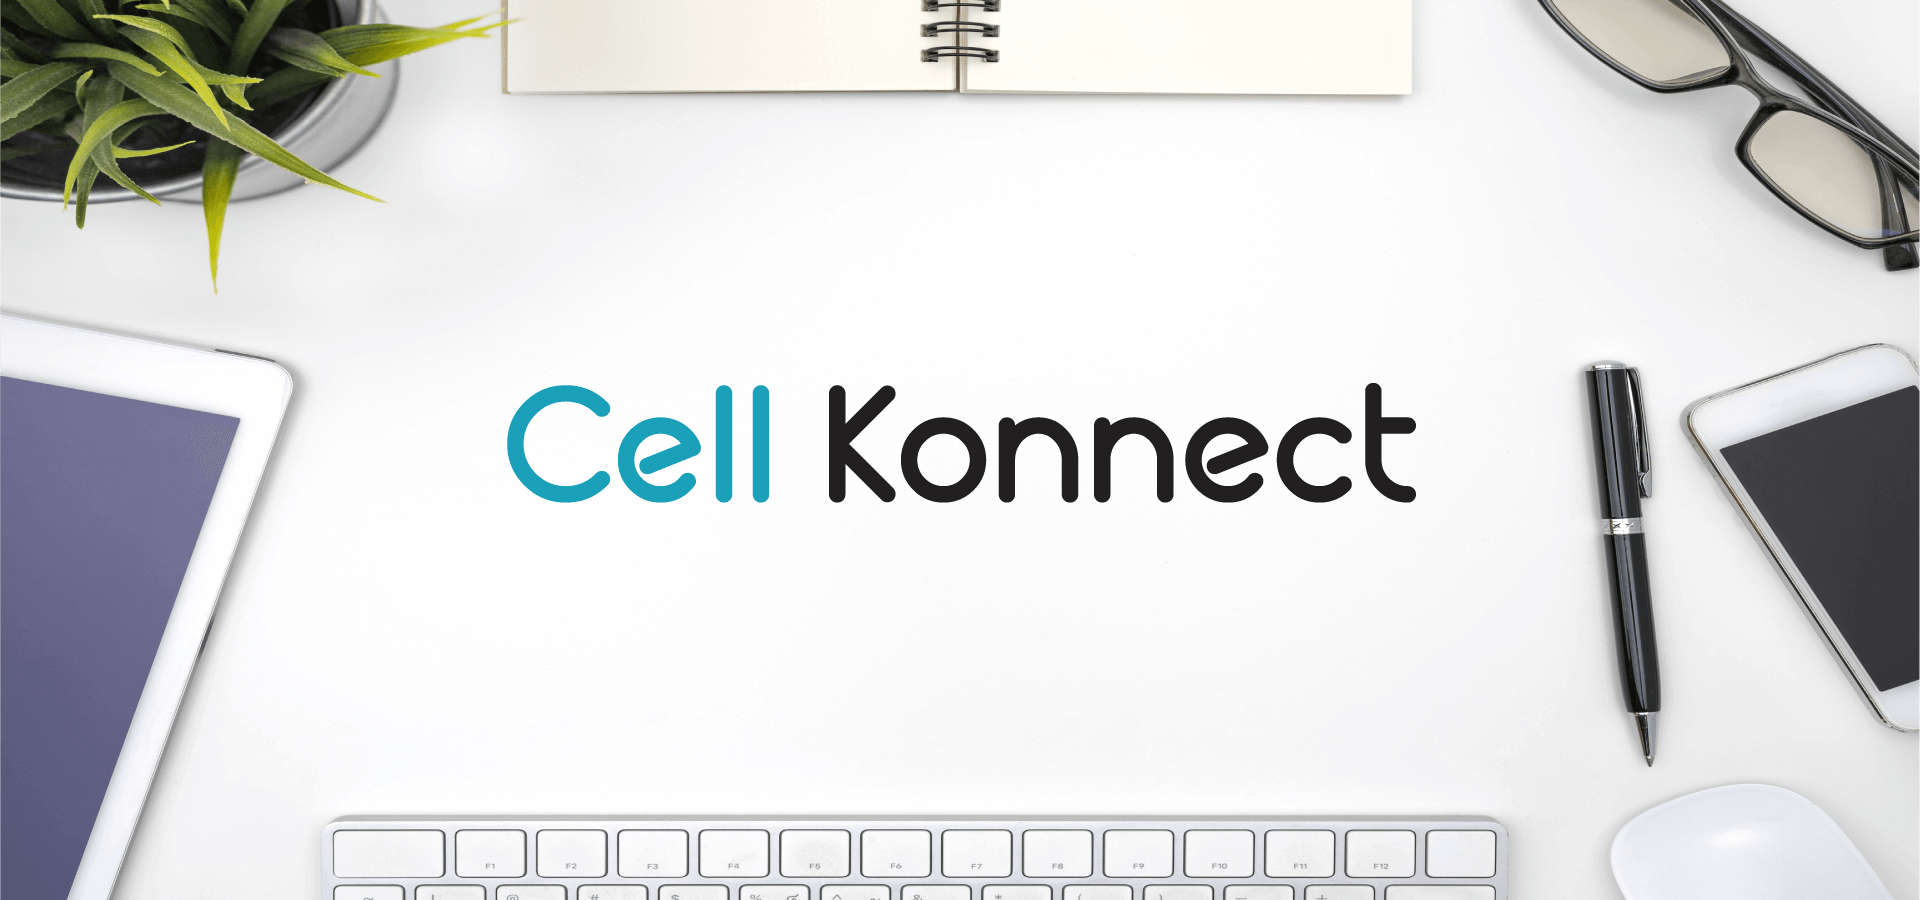 Cell Konnect